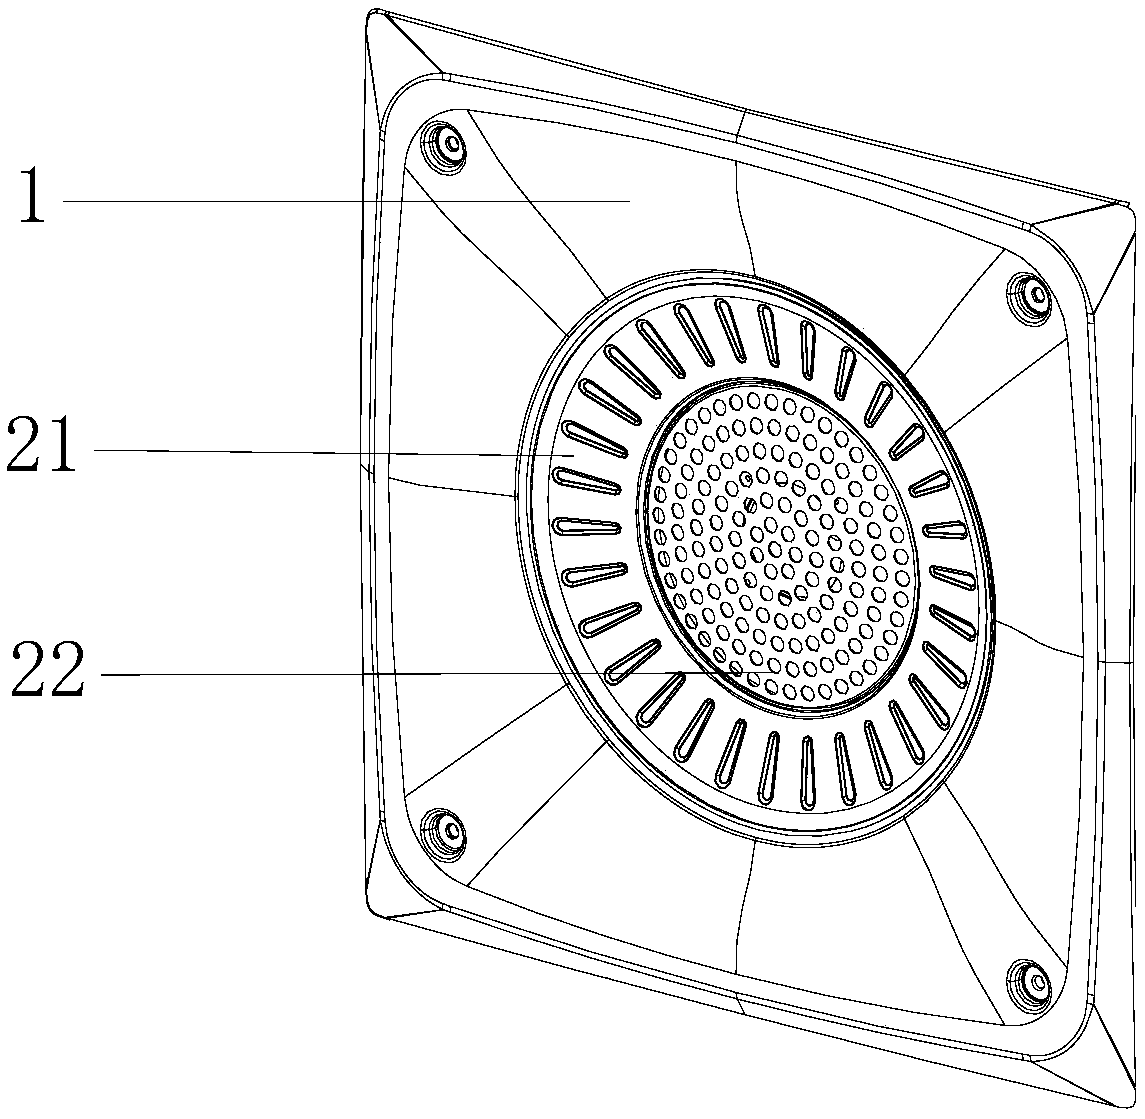 Stage lamp and stage lighting device